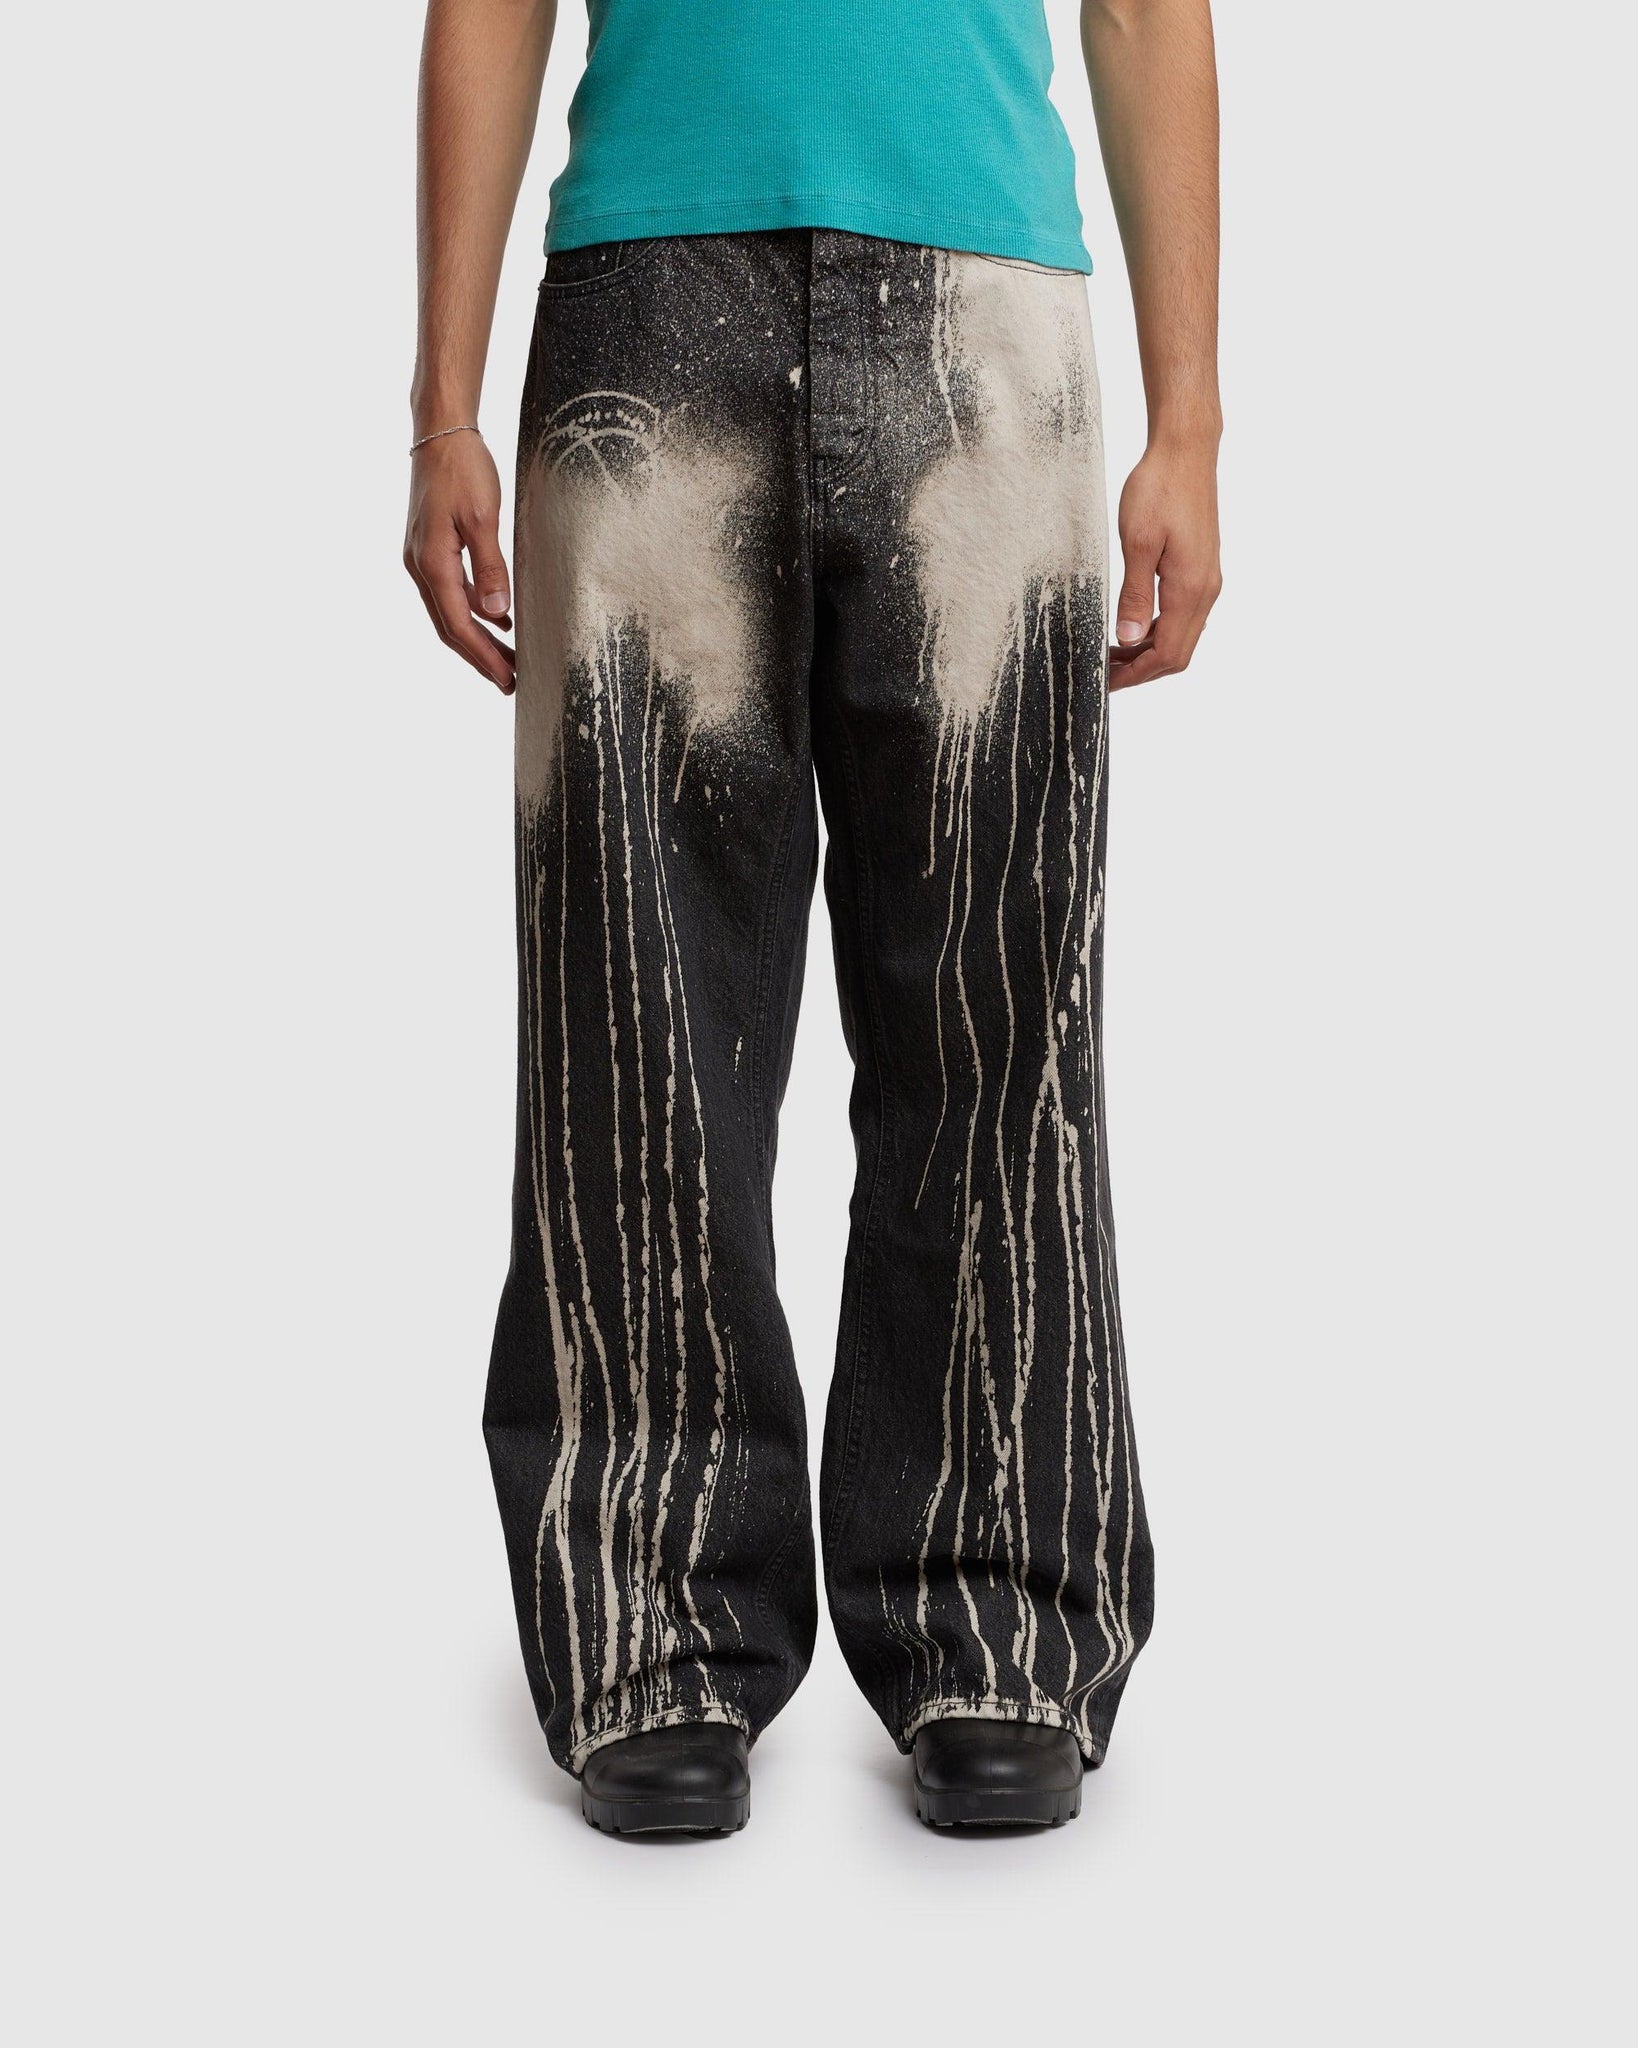 Criss Jeans Bleach Drip - {{ collection.title }} - Chinatown Country Club 